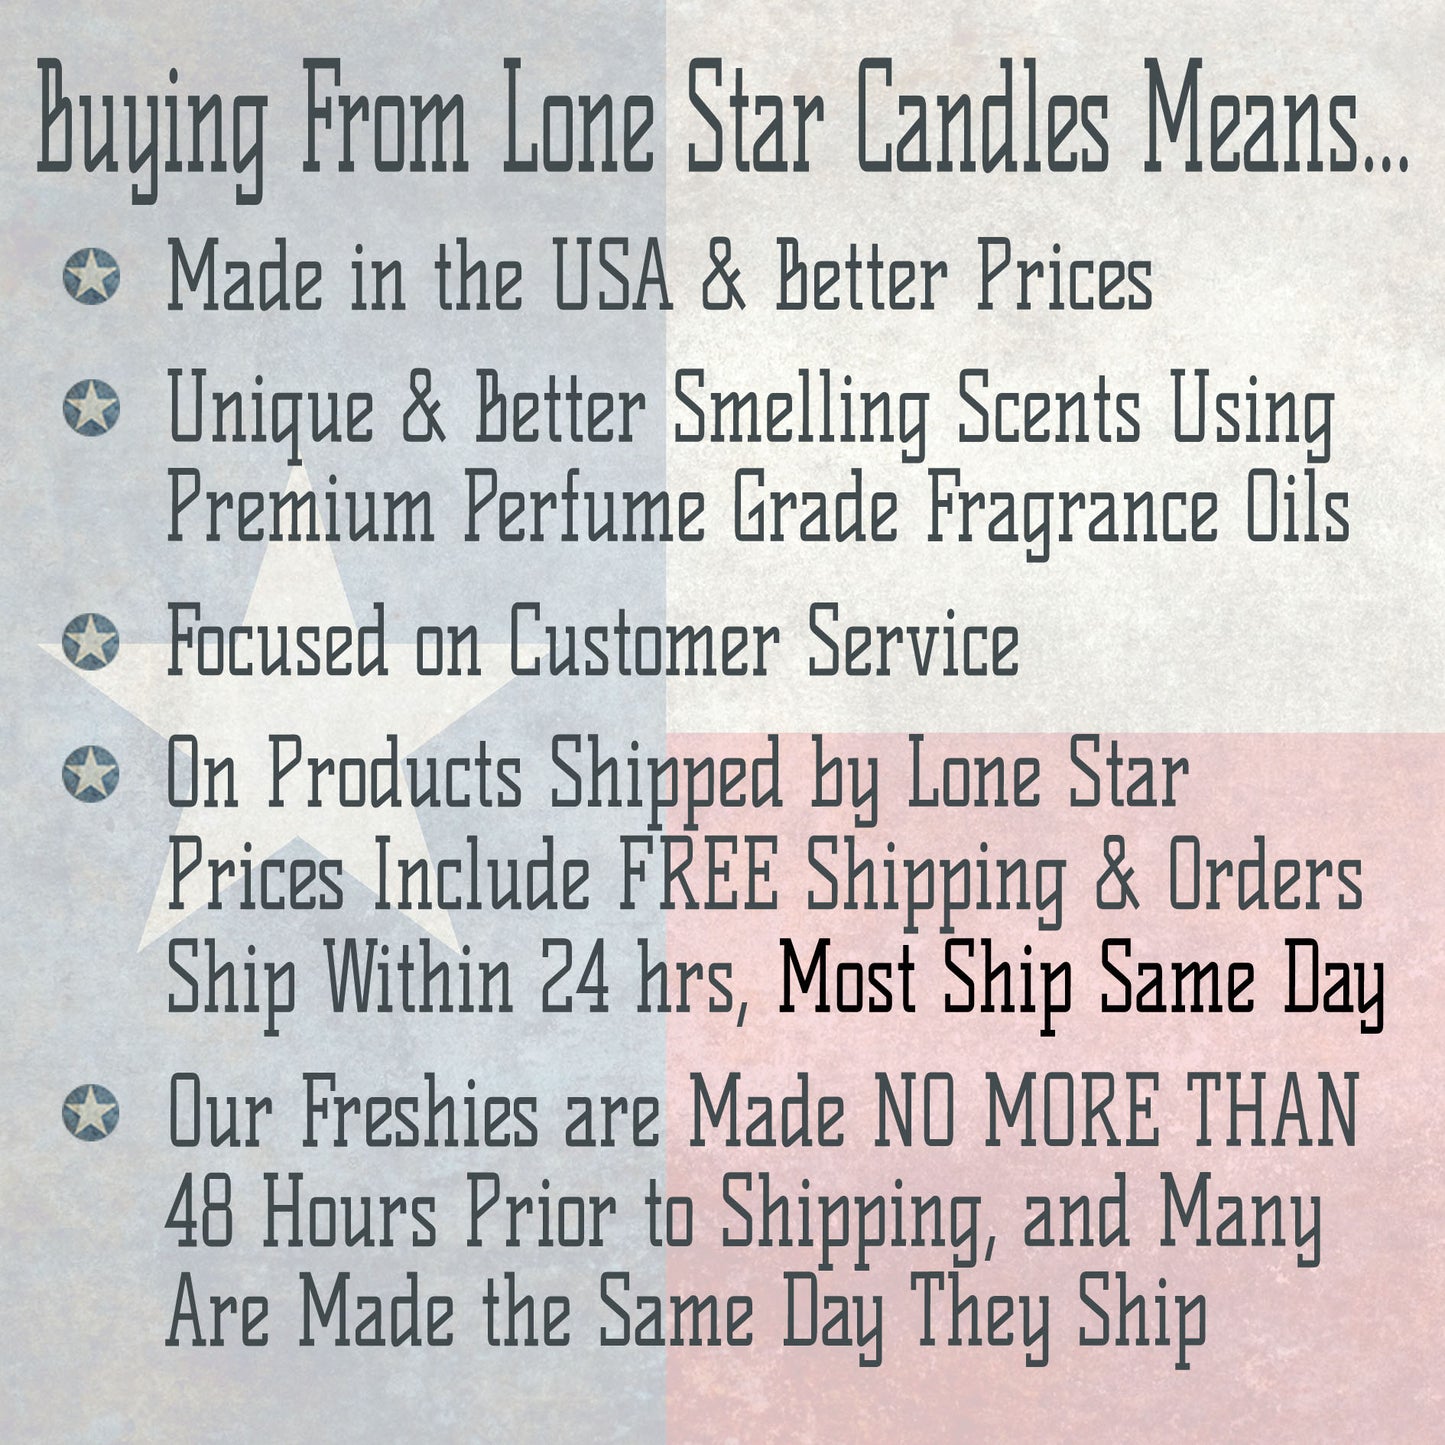 Leather & Lace, Lone Star Candles & More’s Premium Strongly Scented Freshies, Aroma of Genuine Leather and Creamy Vanilla, Car & Air Freshener, USA Made in Texas, Chili Pepper 1-Pack